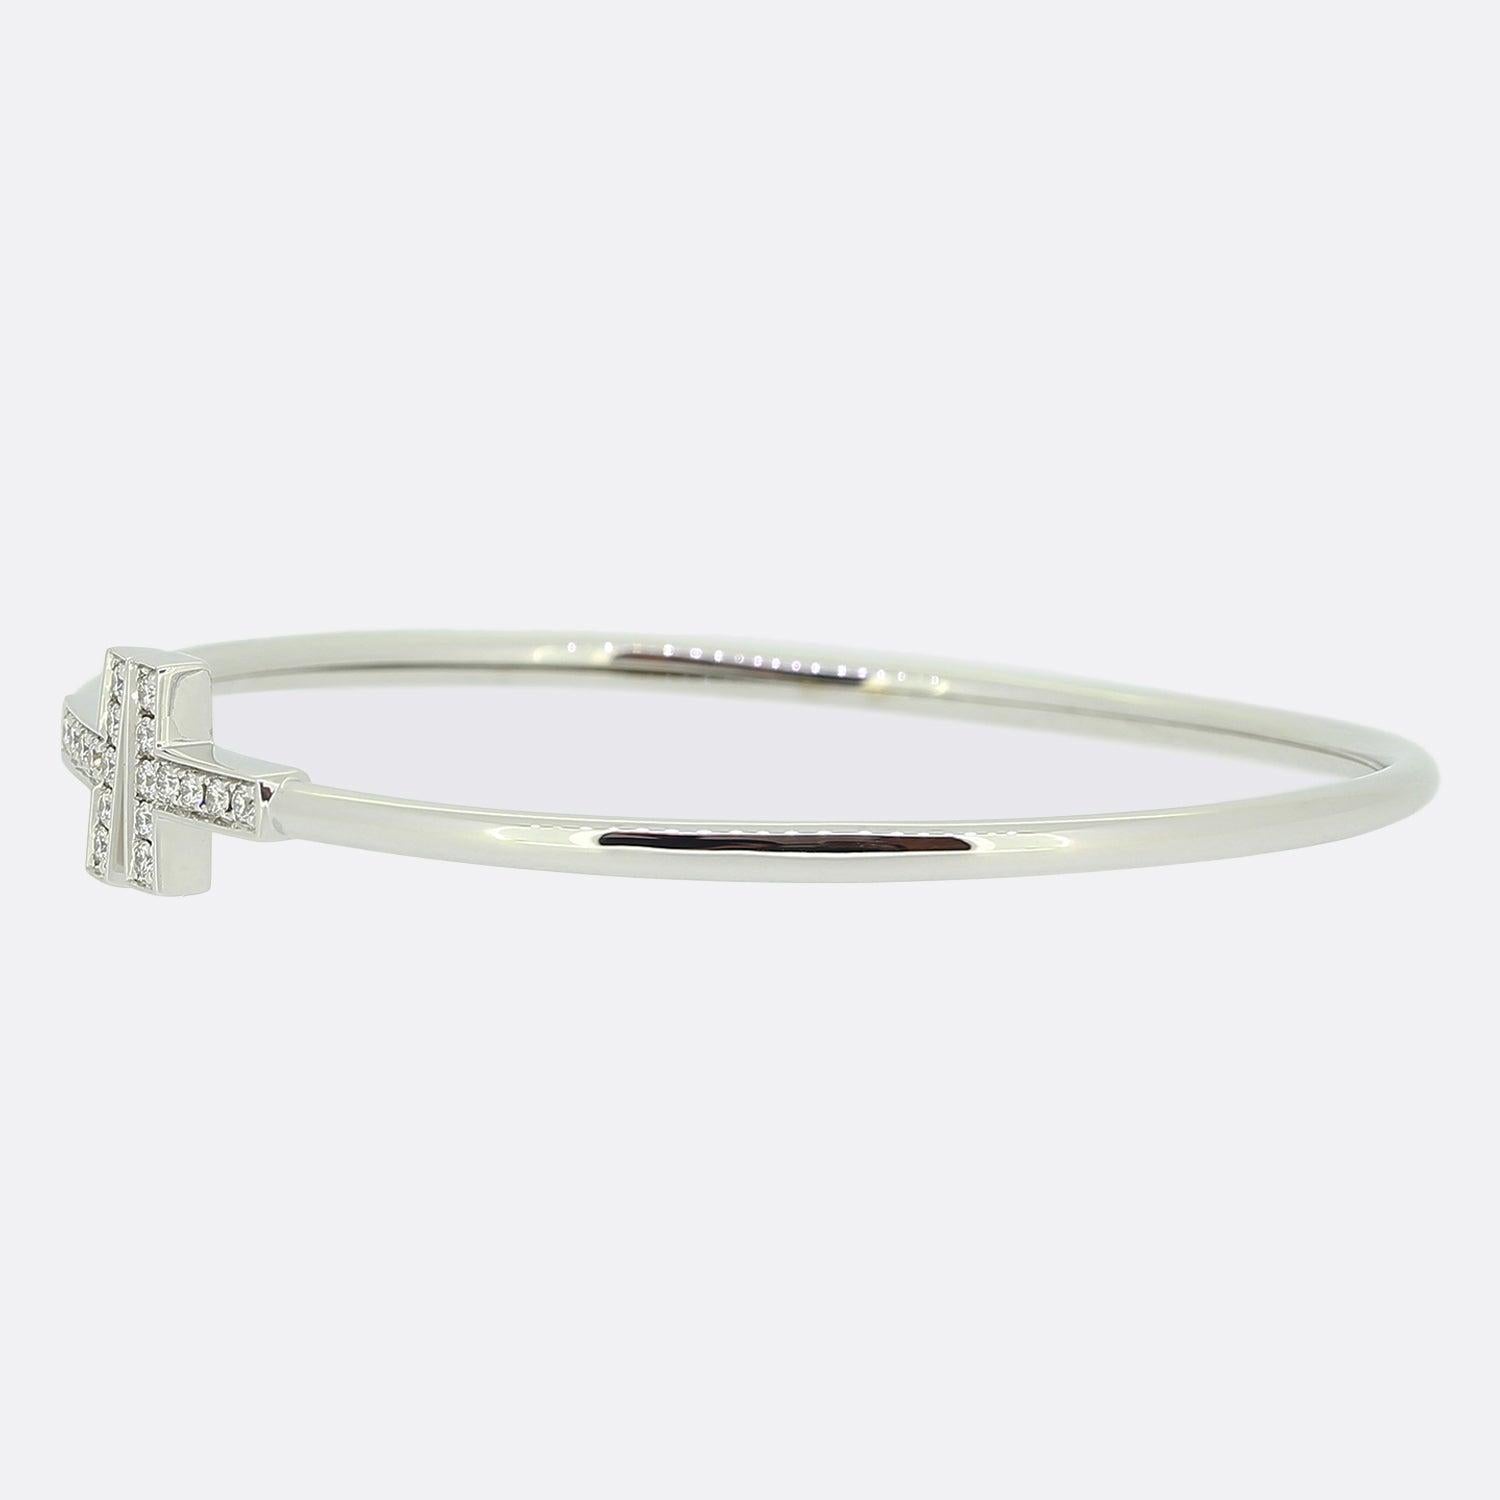 Here we have fabulous diamond bracelet from the world renowned luxury jewellery designer, Tiffany & Co. This piece forms part of the 'Tiffany T' collection and showcases a duo of diamond set 'T' motifs at the centre of the face atop a slim 18ct